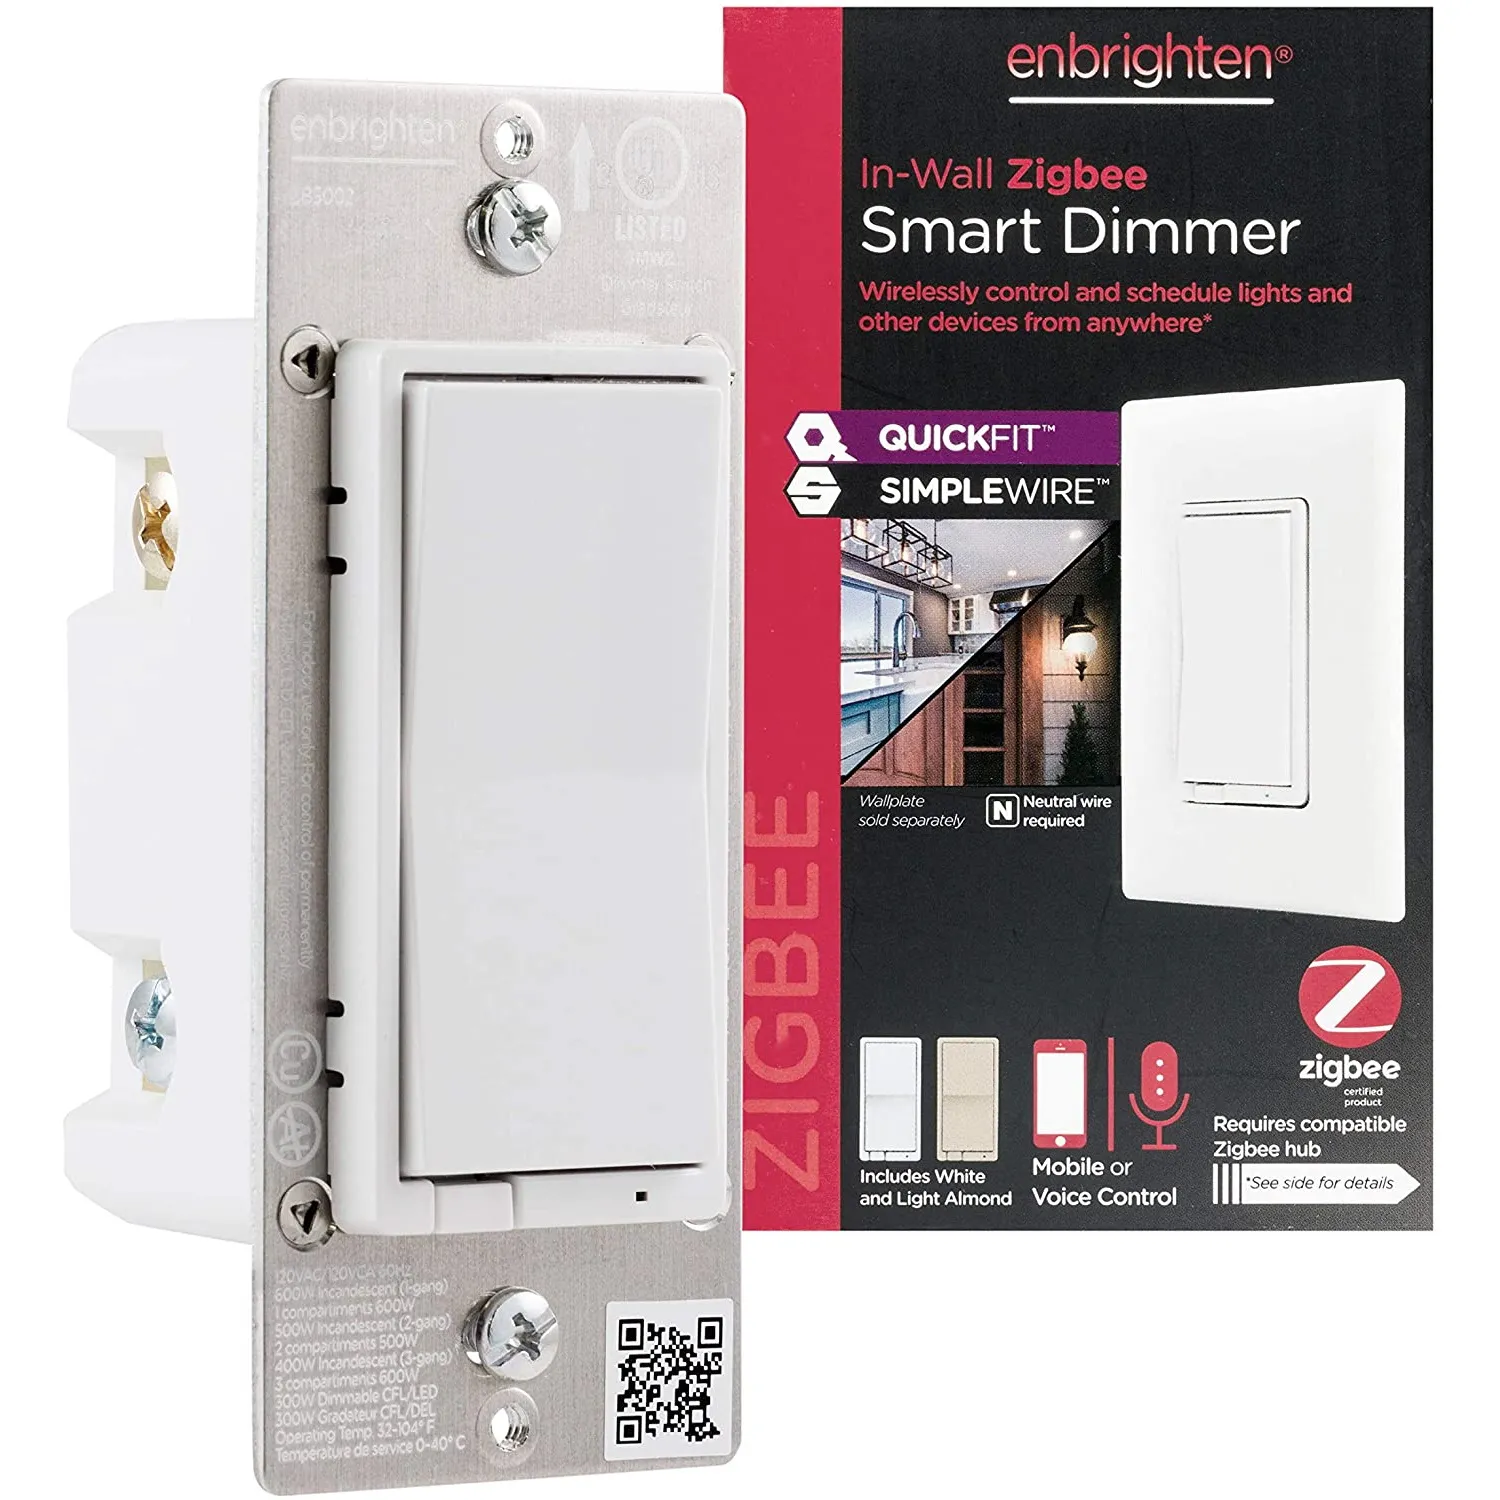 In-Wall Dimmer